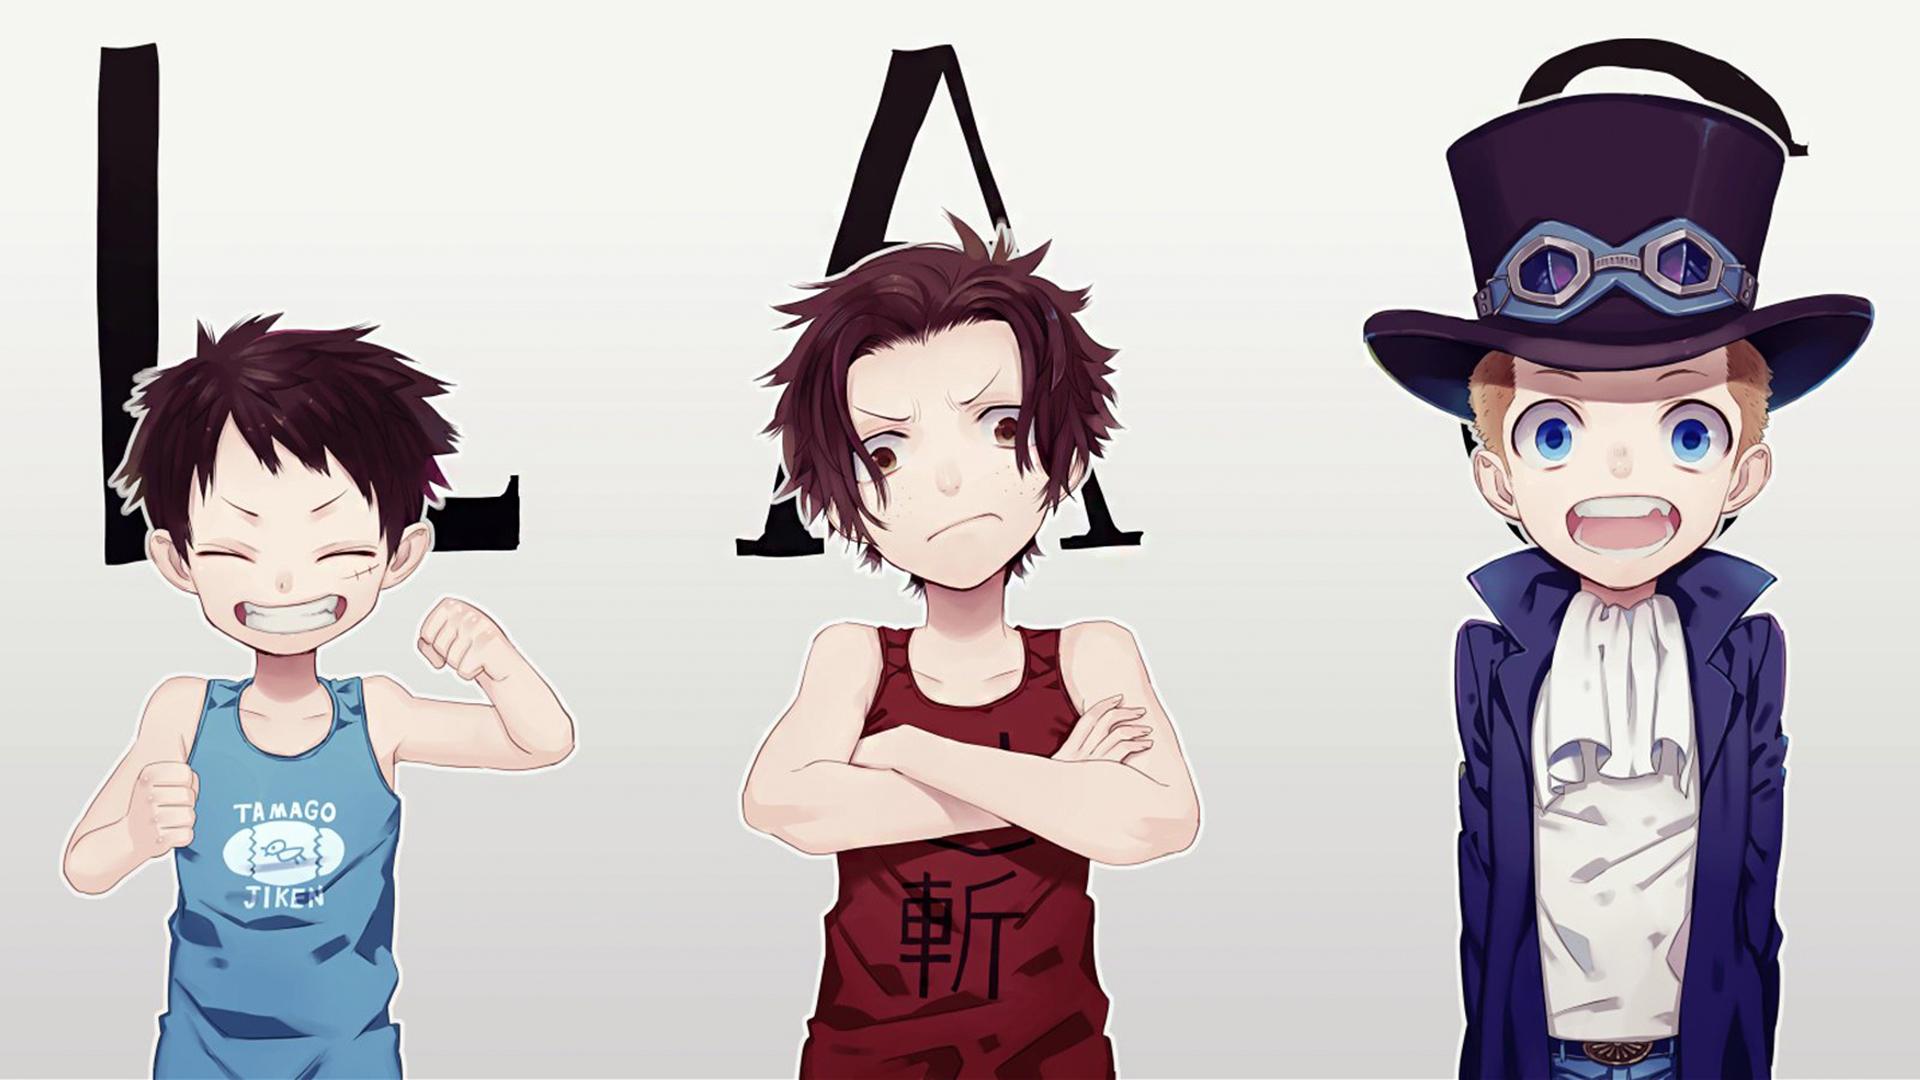 1920 x 1080 · jpeg - Luffy,Ace and Sabo  and  | 1600x900 | ID:606281 - Wallpaper Abyss